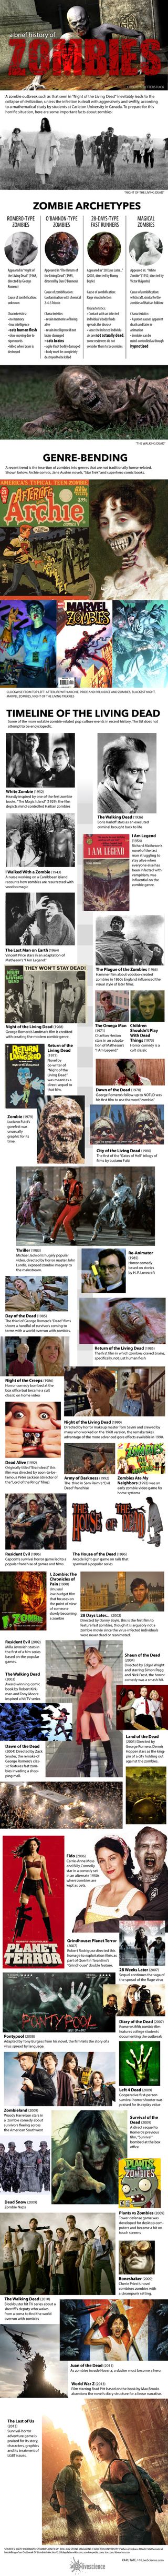 Facts about the zombie phenomenon in pop culture, movies and gaming. [See full infographic]